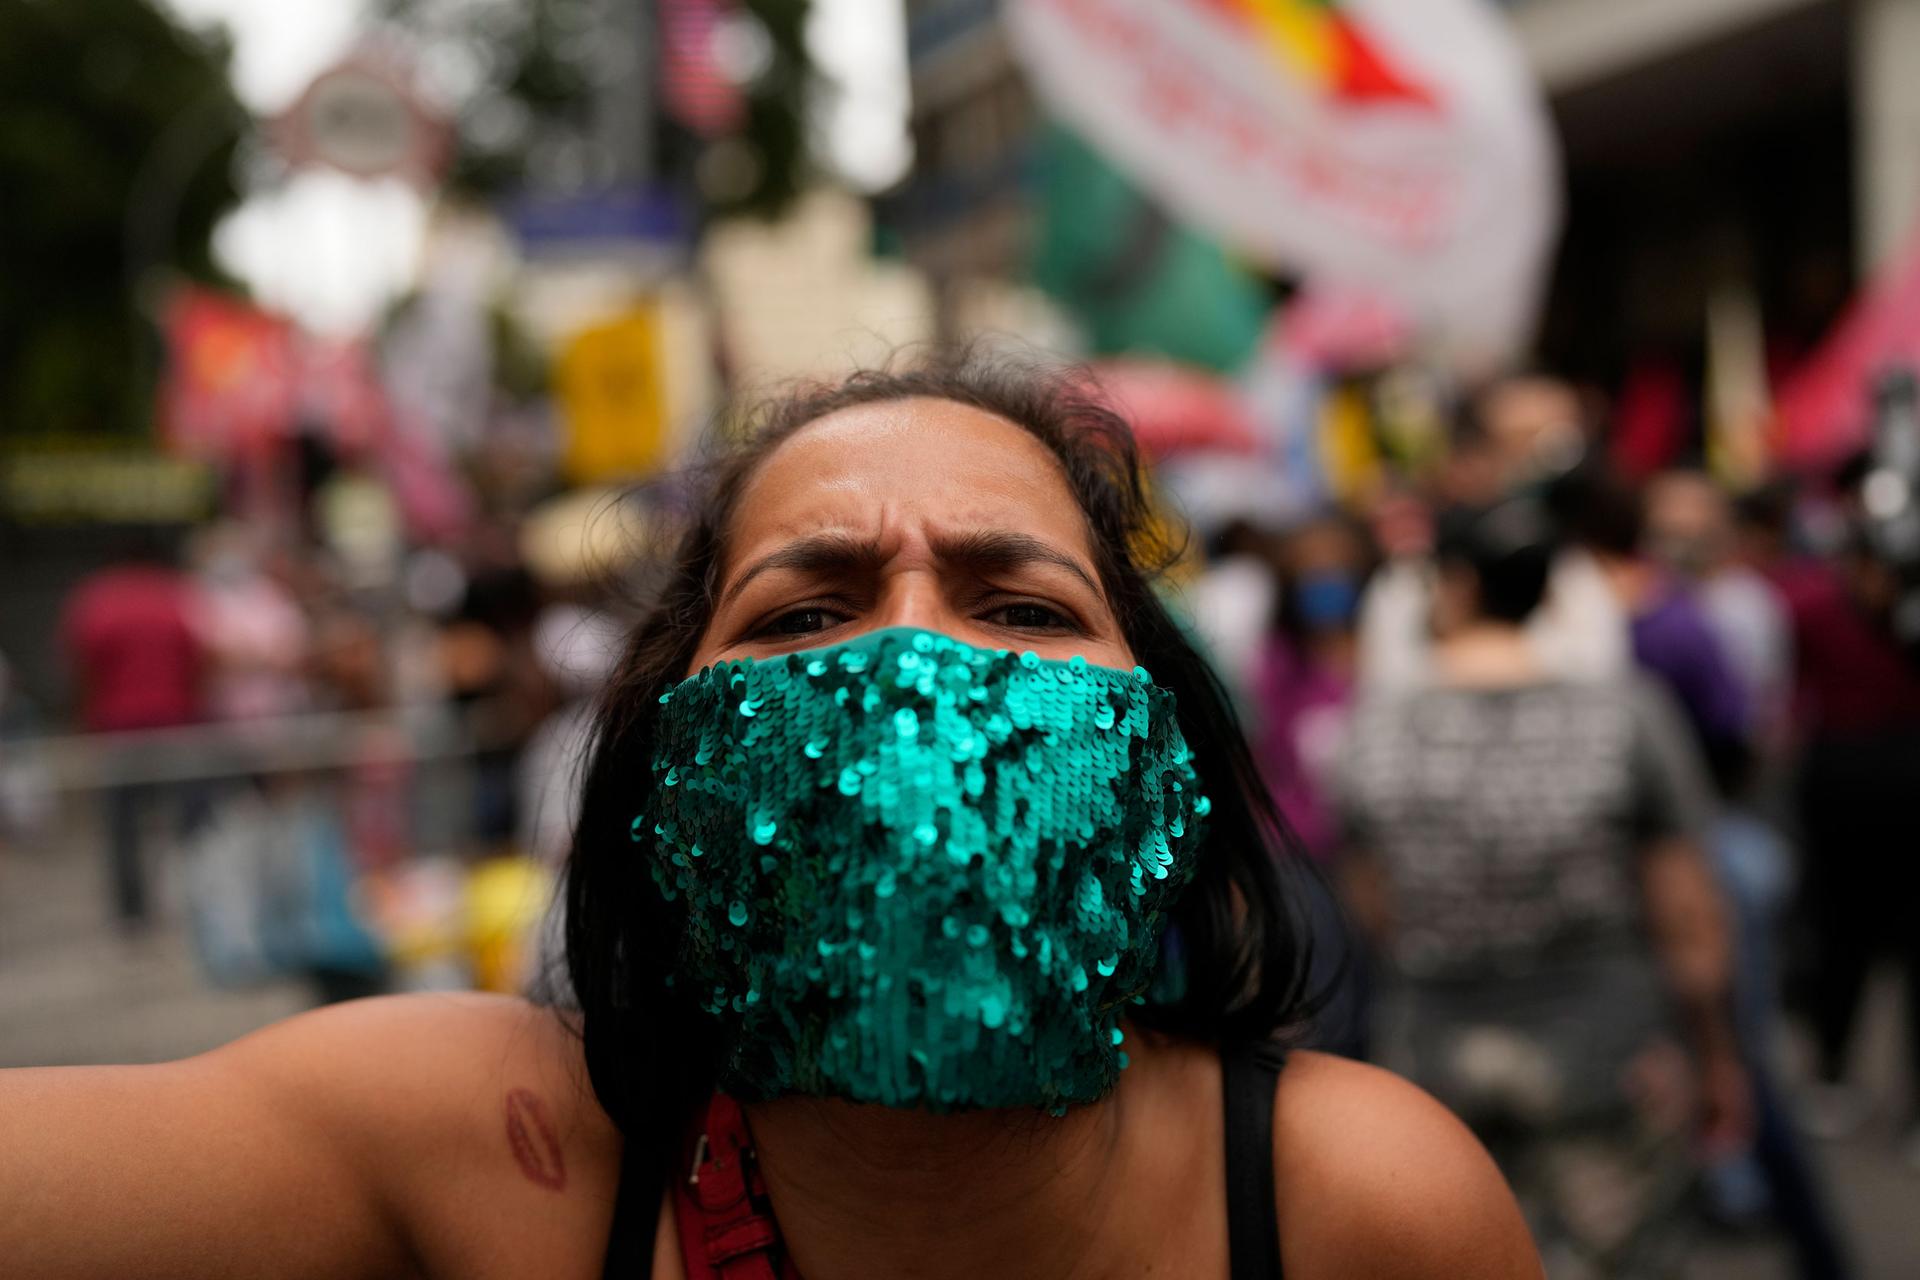 A woman attends a protest against Brazilian President Jair Bolsonaro's handling of the COVID-19 pandemic, the economy and corruption, on Independence Day in Rio de Janeiro, Brazil, Tuesday, Sept. 7, 2021. 